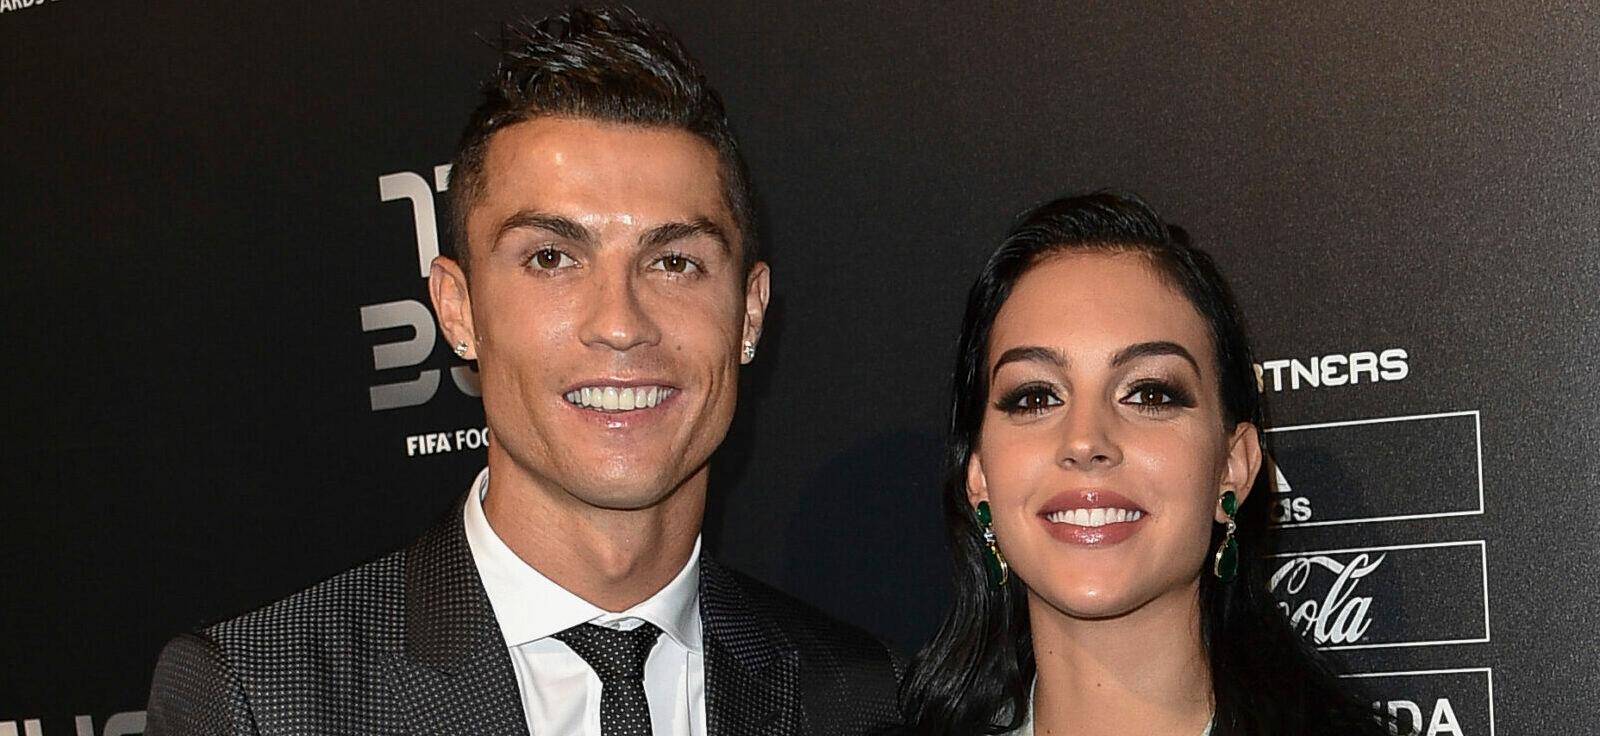 Cristiano Ronaldo with his son and his fiancee at The Best FIFA Football Awards in London